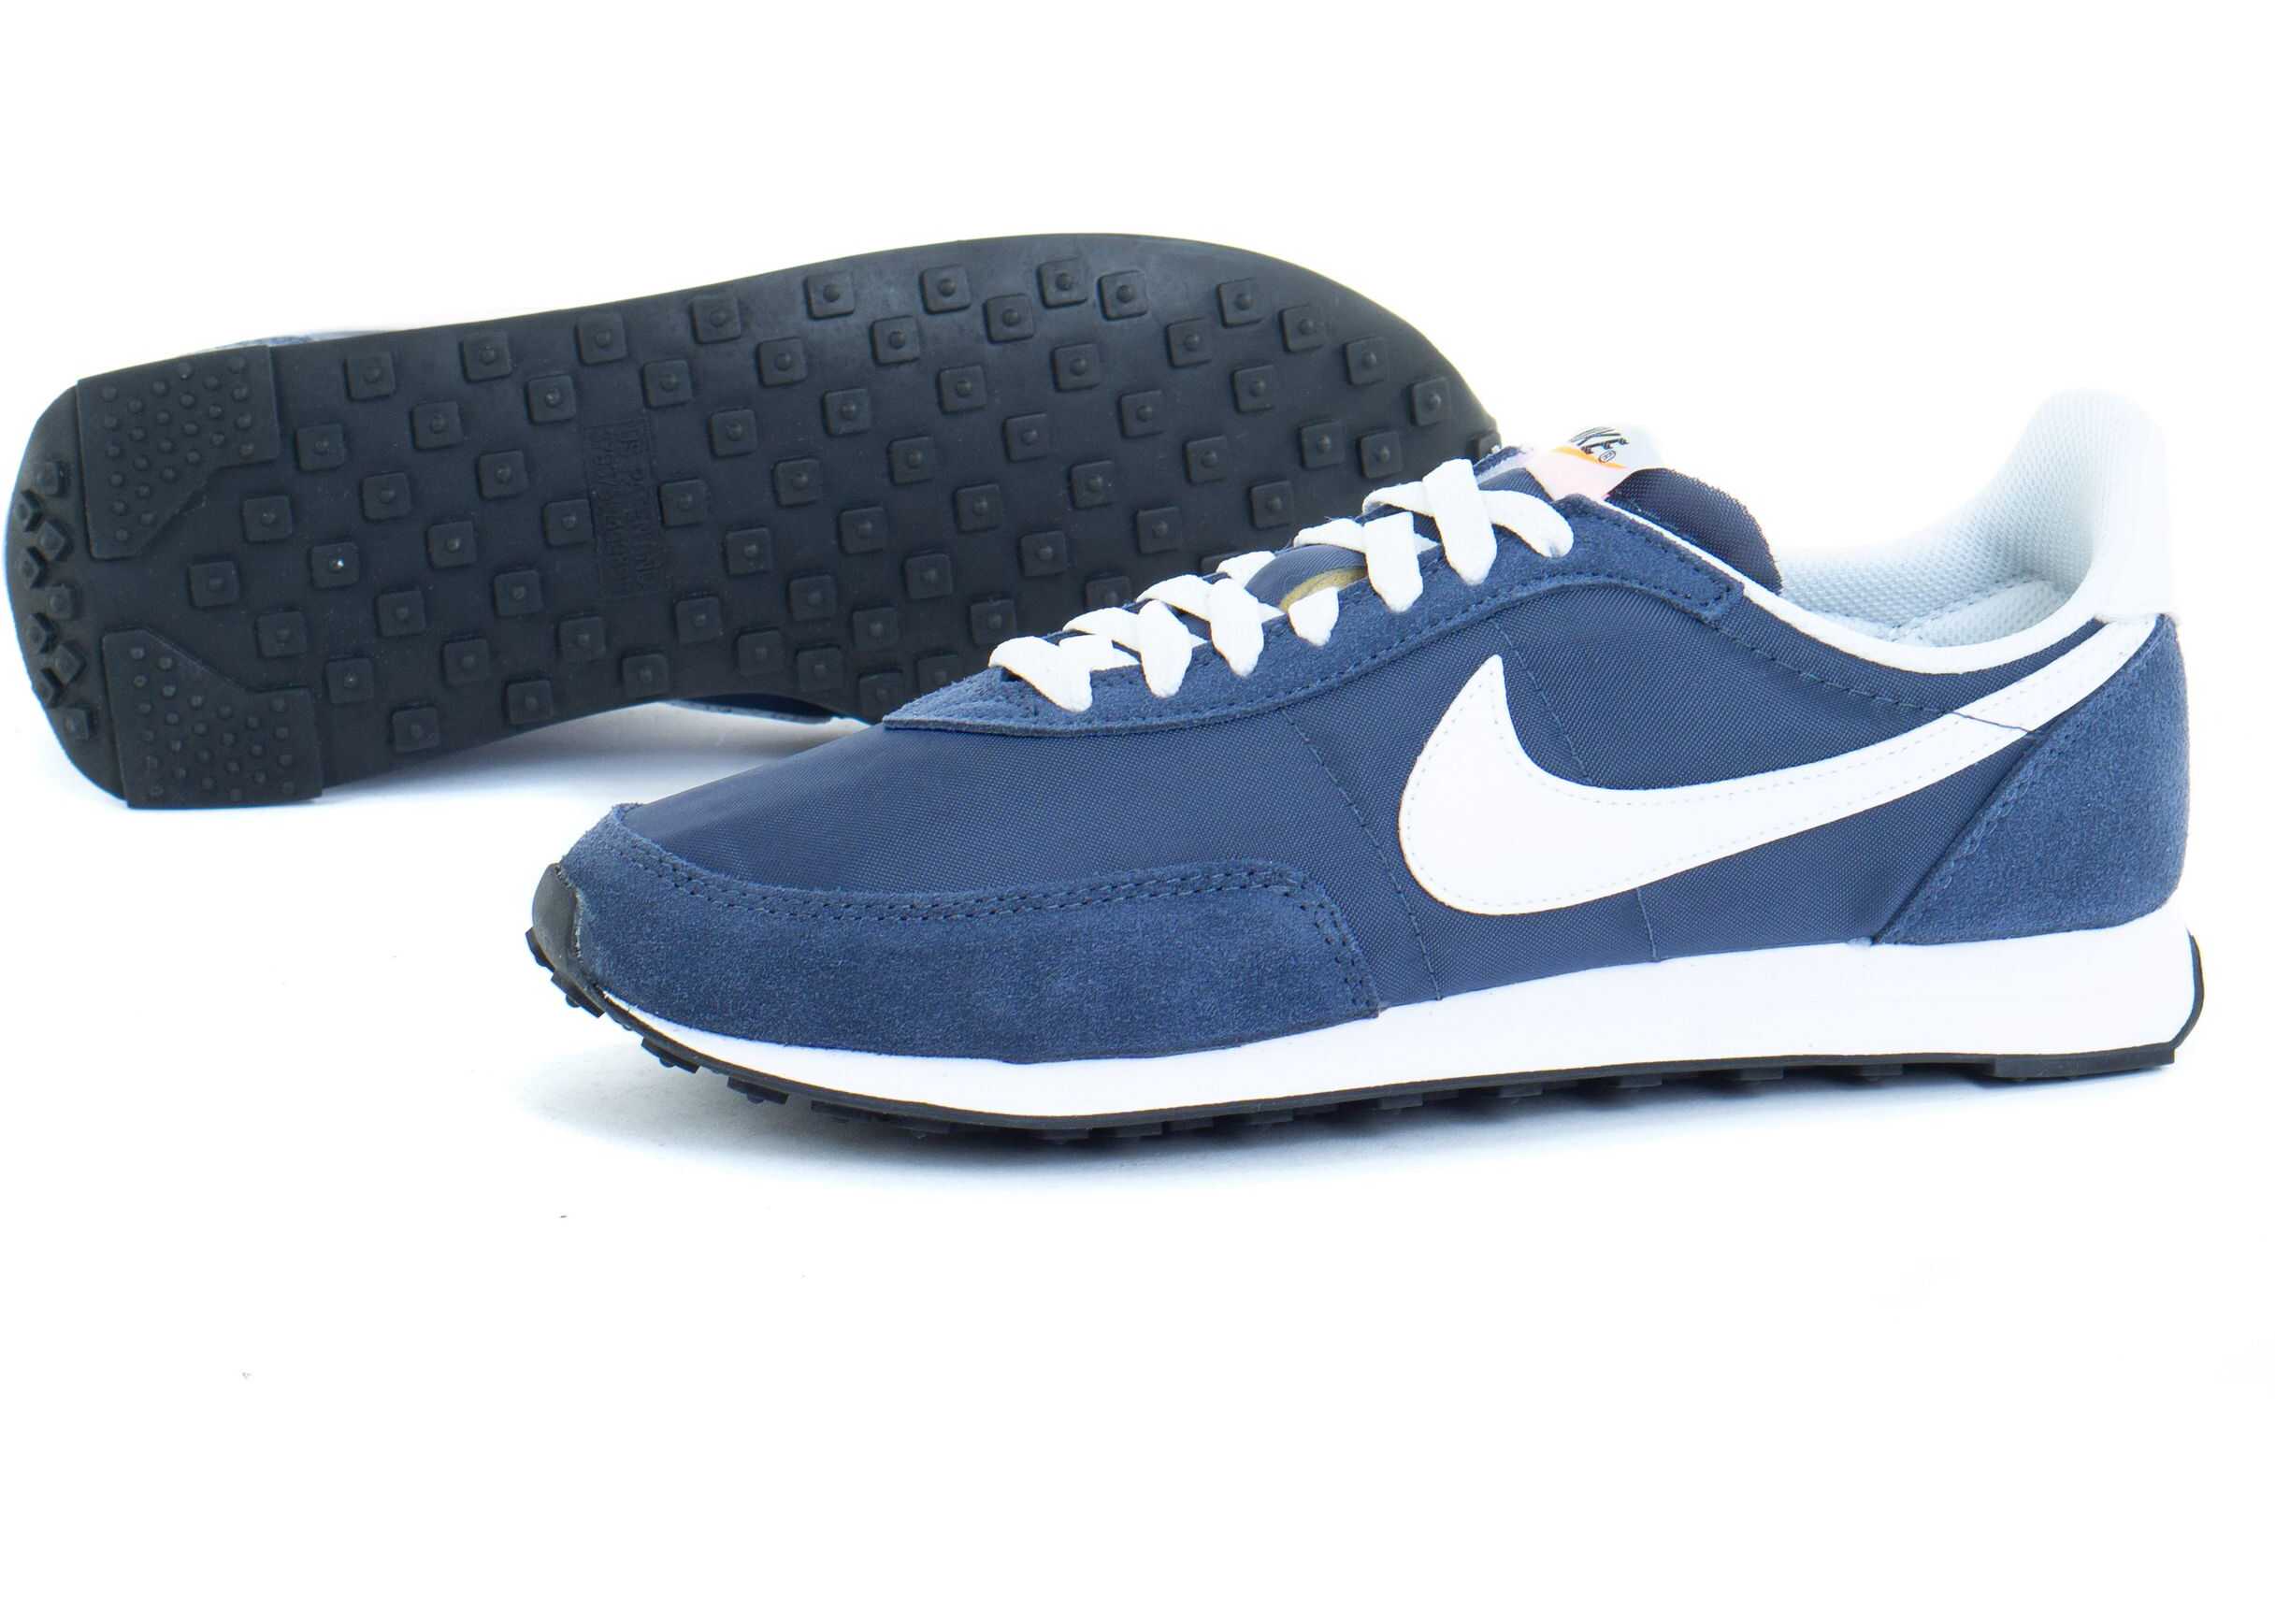 Nike Waffle Trainer 2 DH1349 Navy Blue